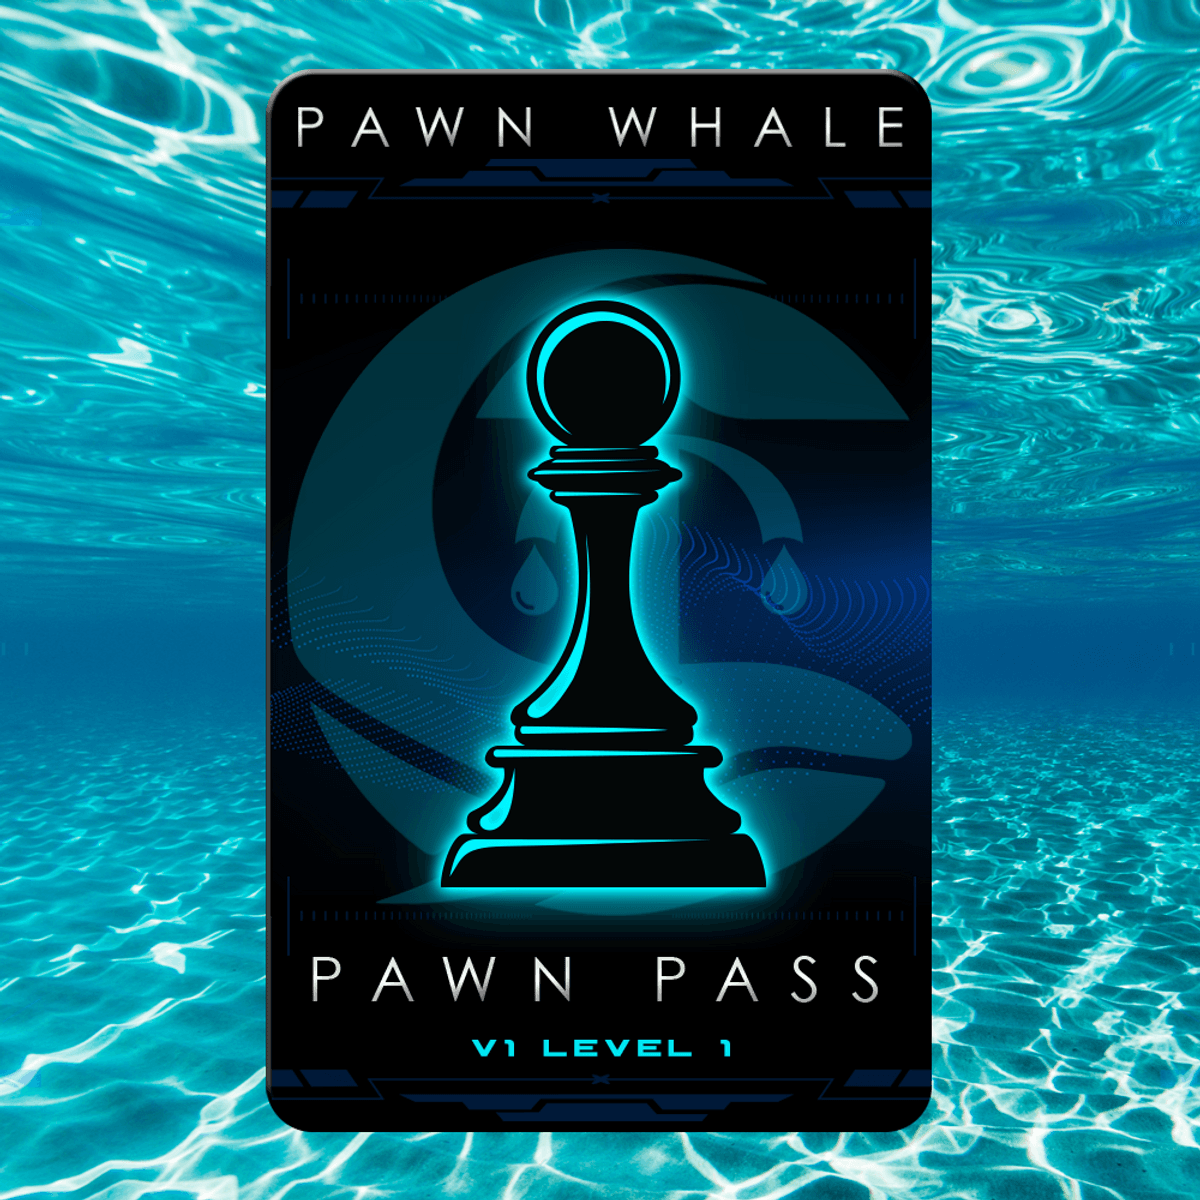 Pawn Whale Pass #2526